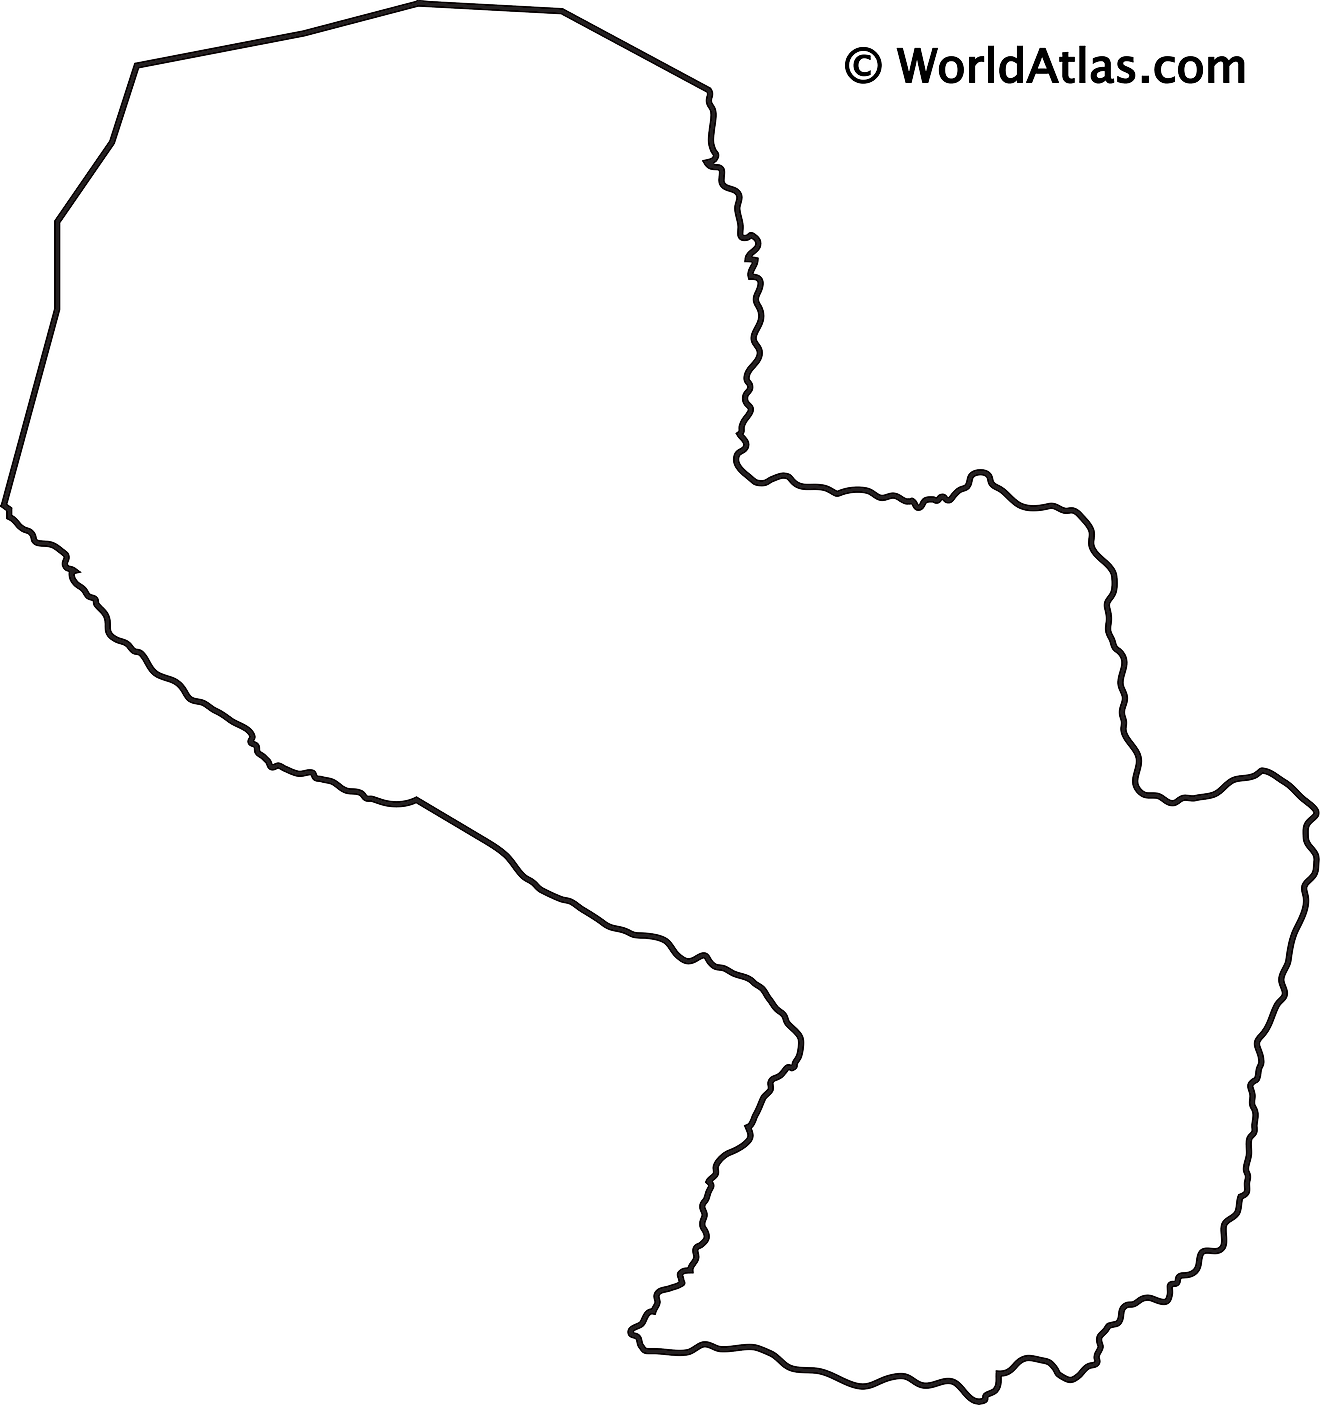 Blank Outline Map of Paraguay